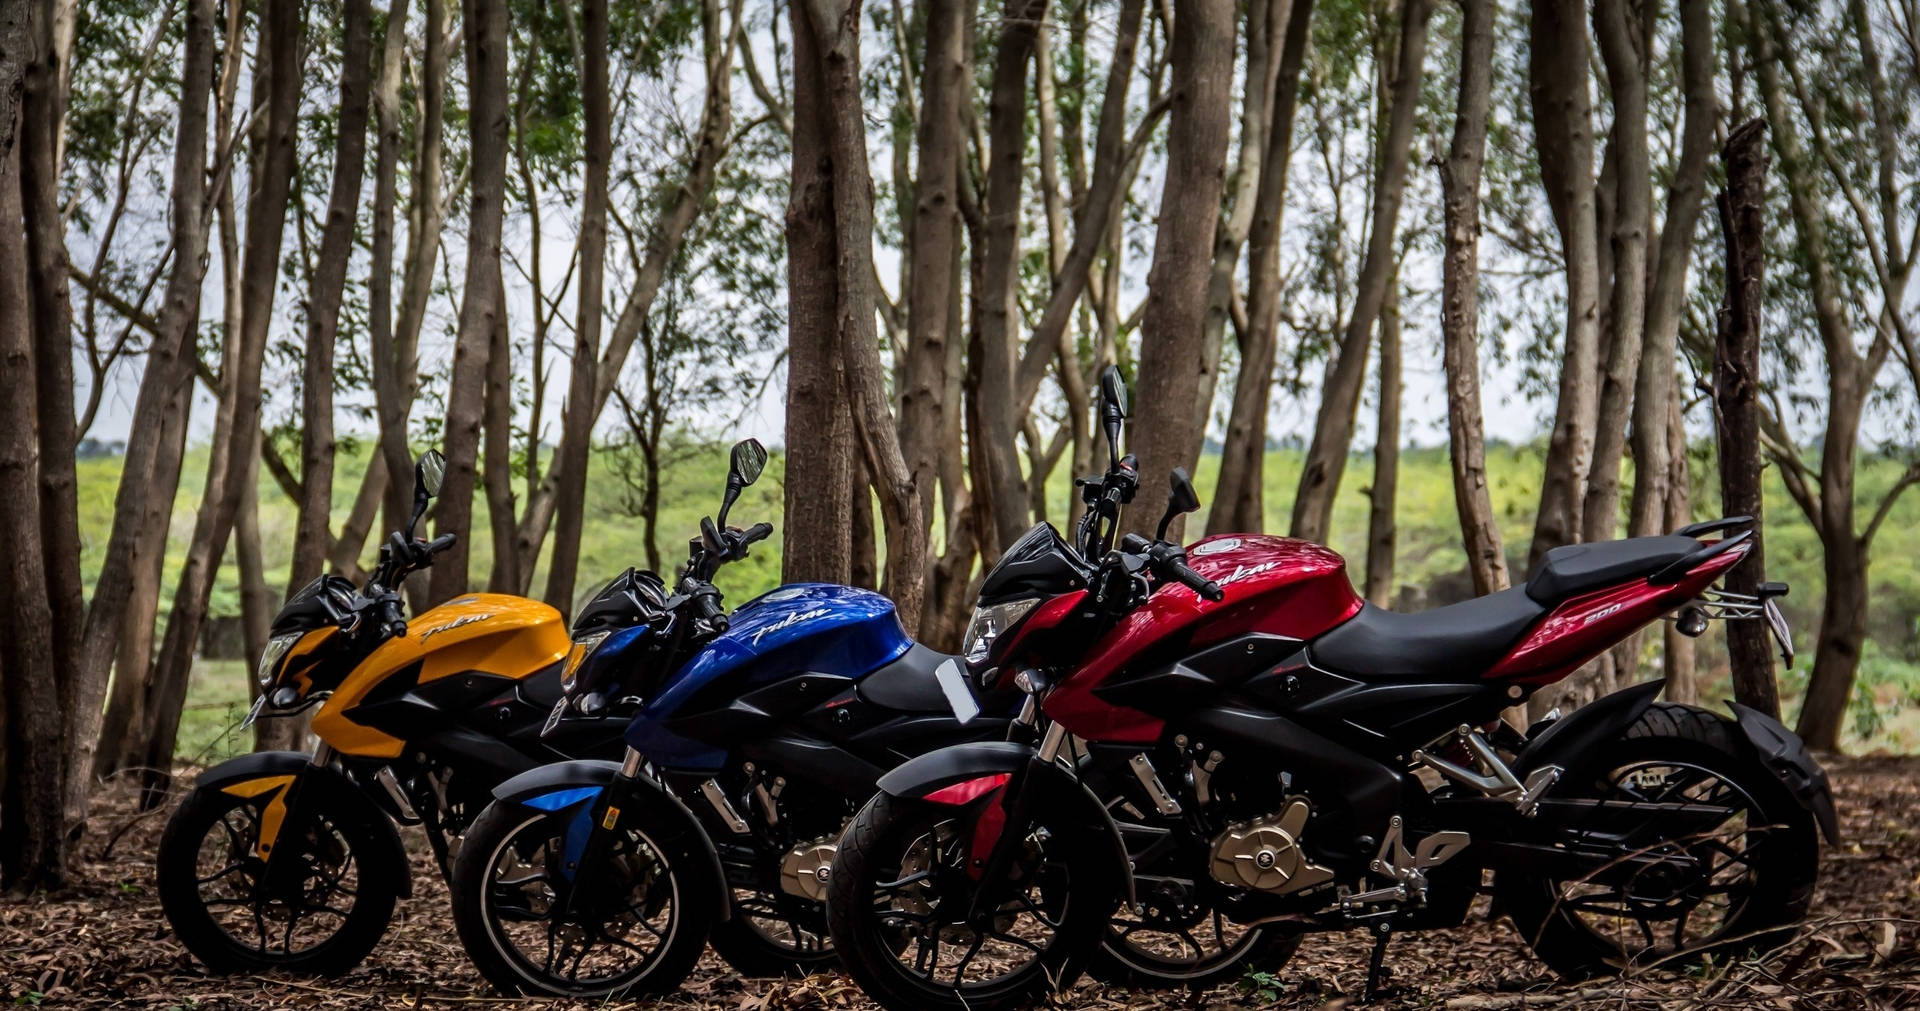 Ns 200 Motorcycles In Forest